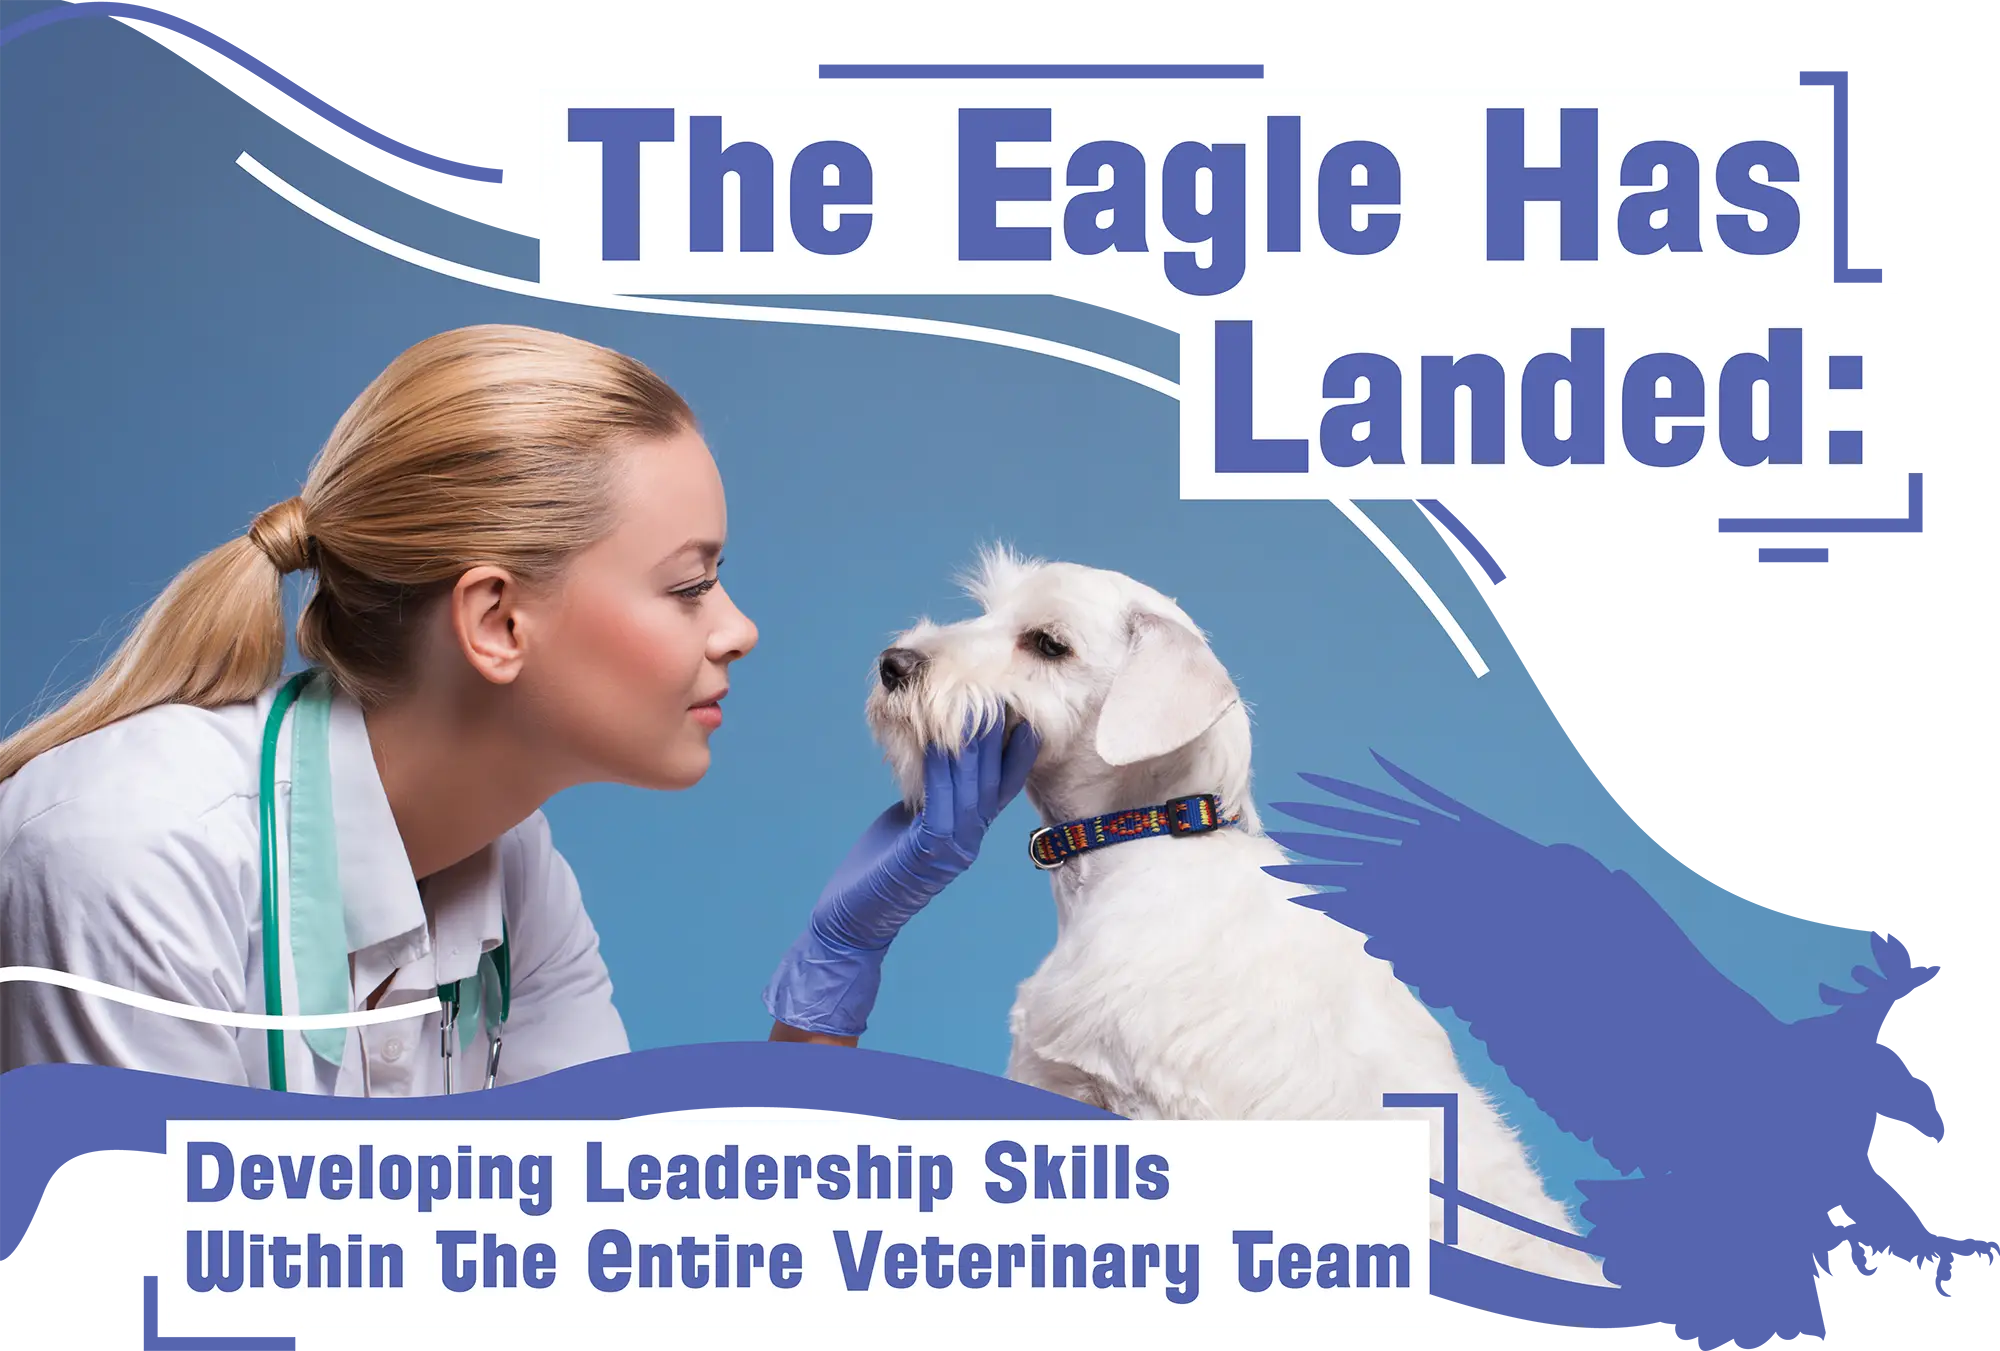 The Eagle Has Landed: Developing Leadership Skills Within the Entire Veterinary Team; a female veterinarian looking at a white dog